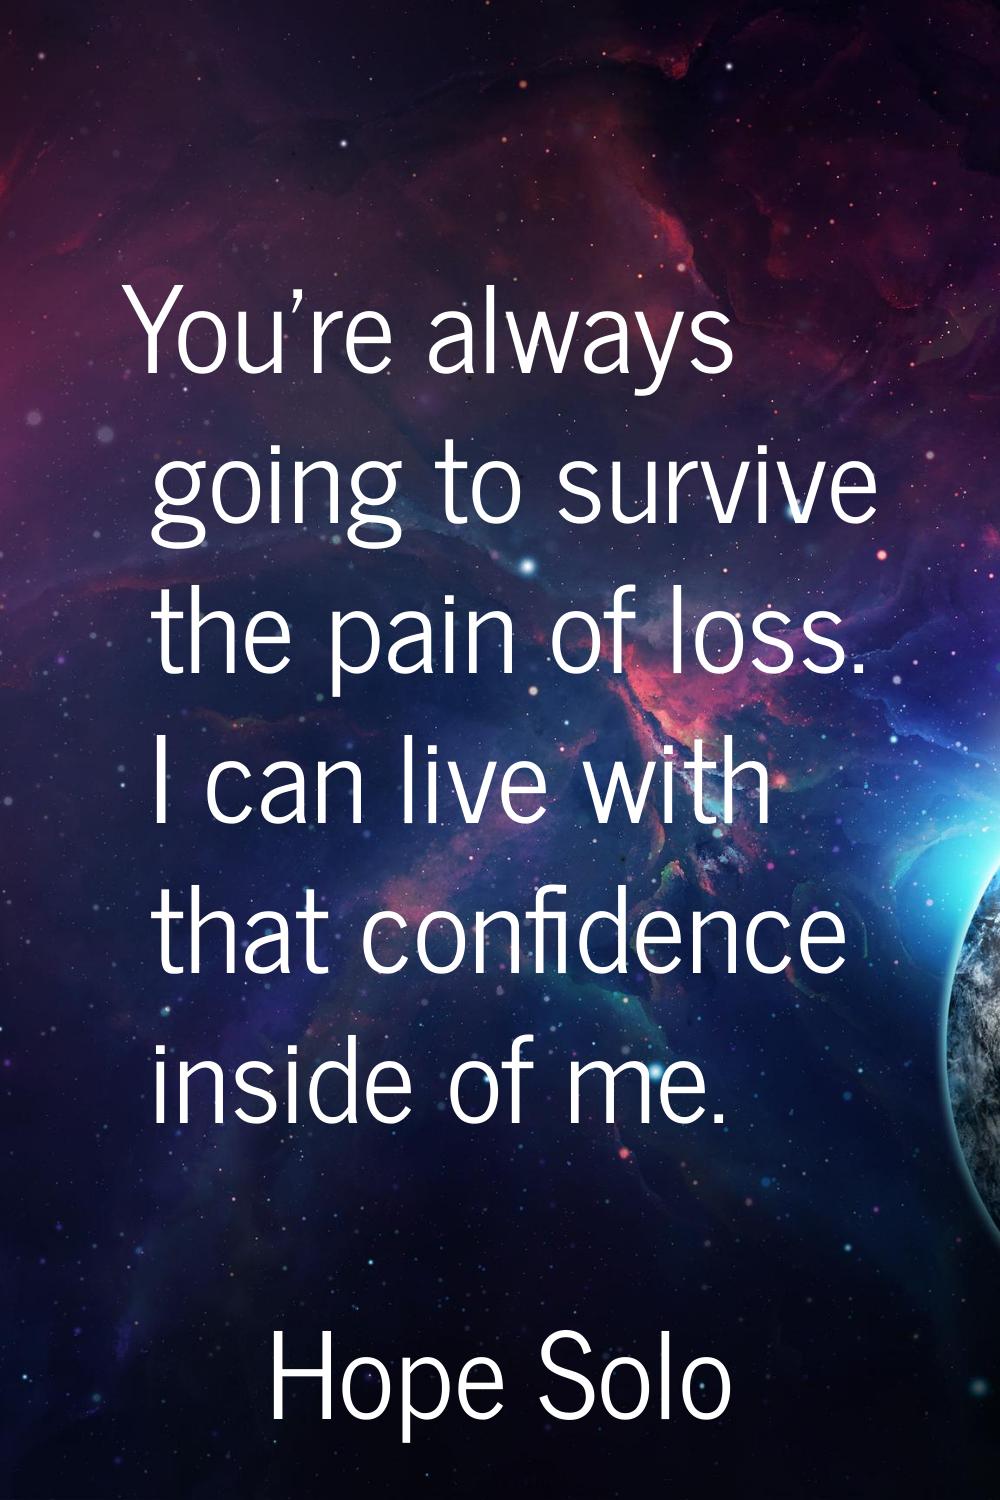 You're always going to survive the pain of loss. I can live with that confidence inside of me.